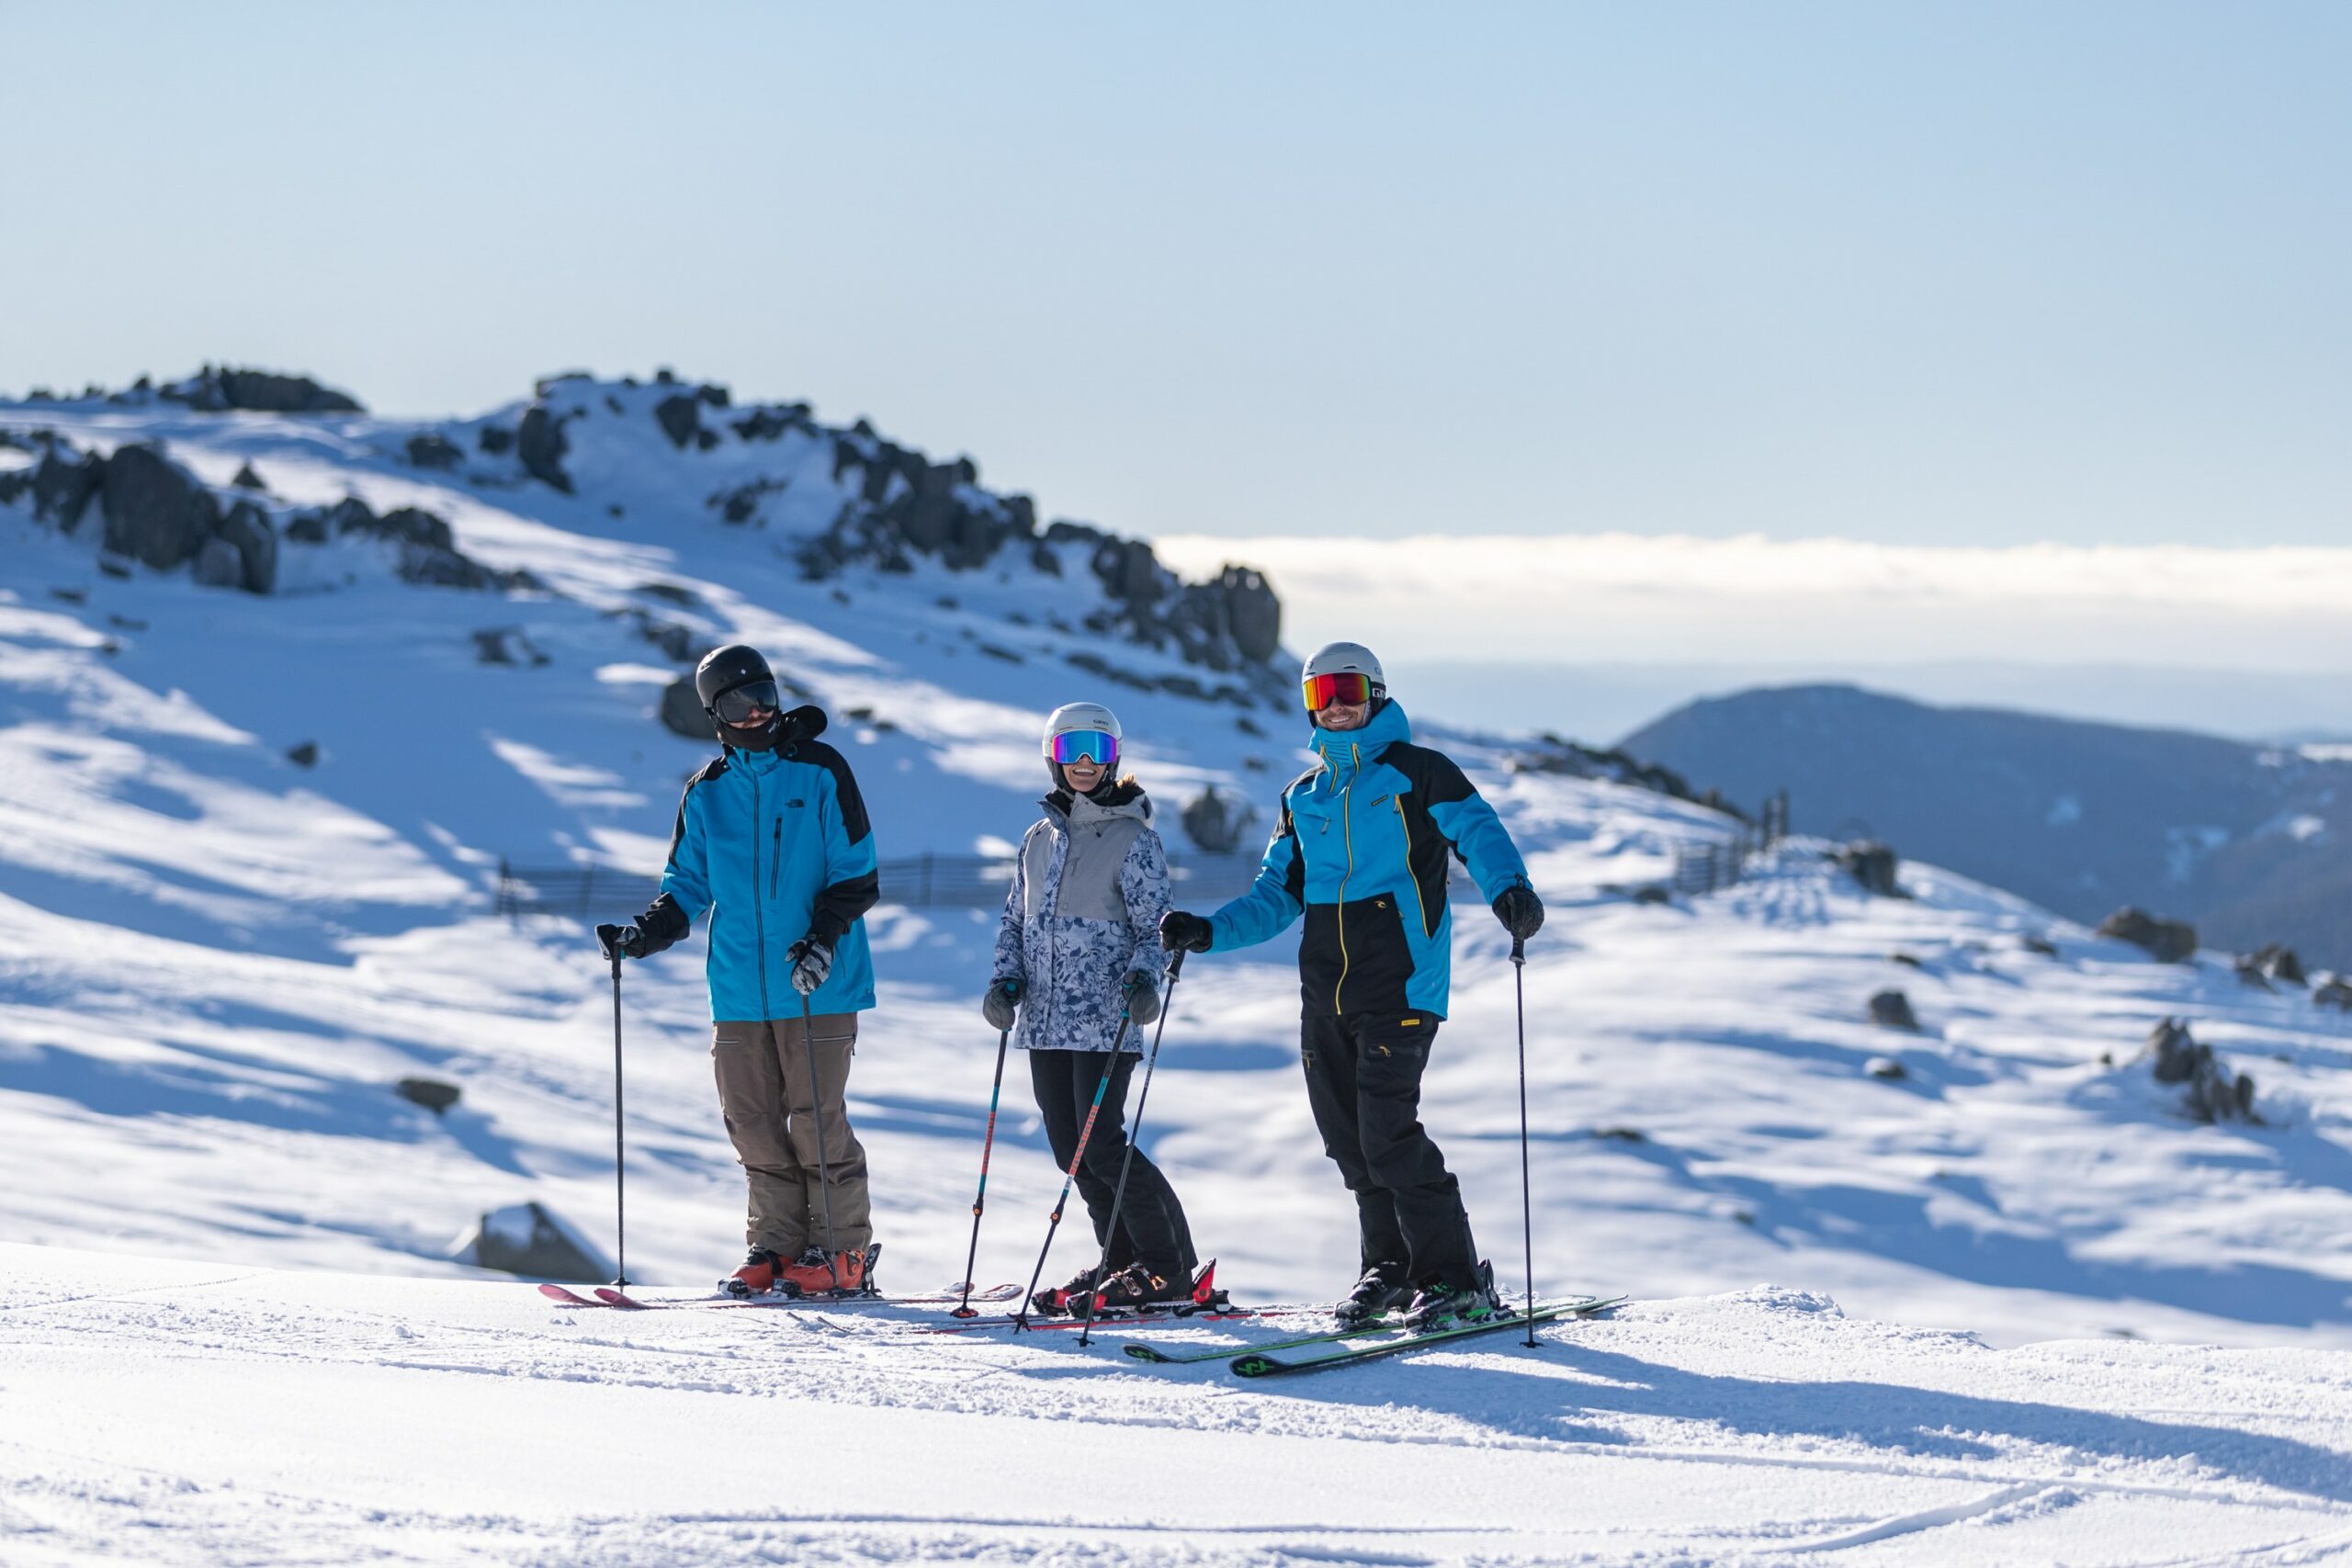 First Snow Holiday: Beginners Guide to Skiing and Snowboarding in the Snowy Mountains